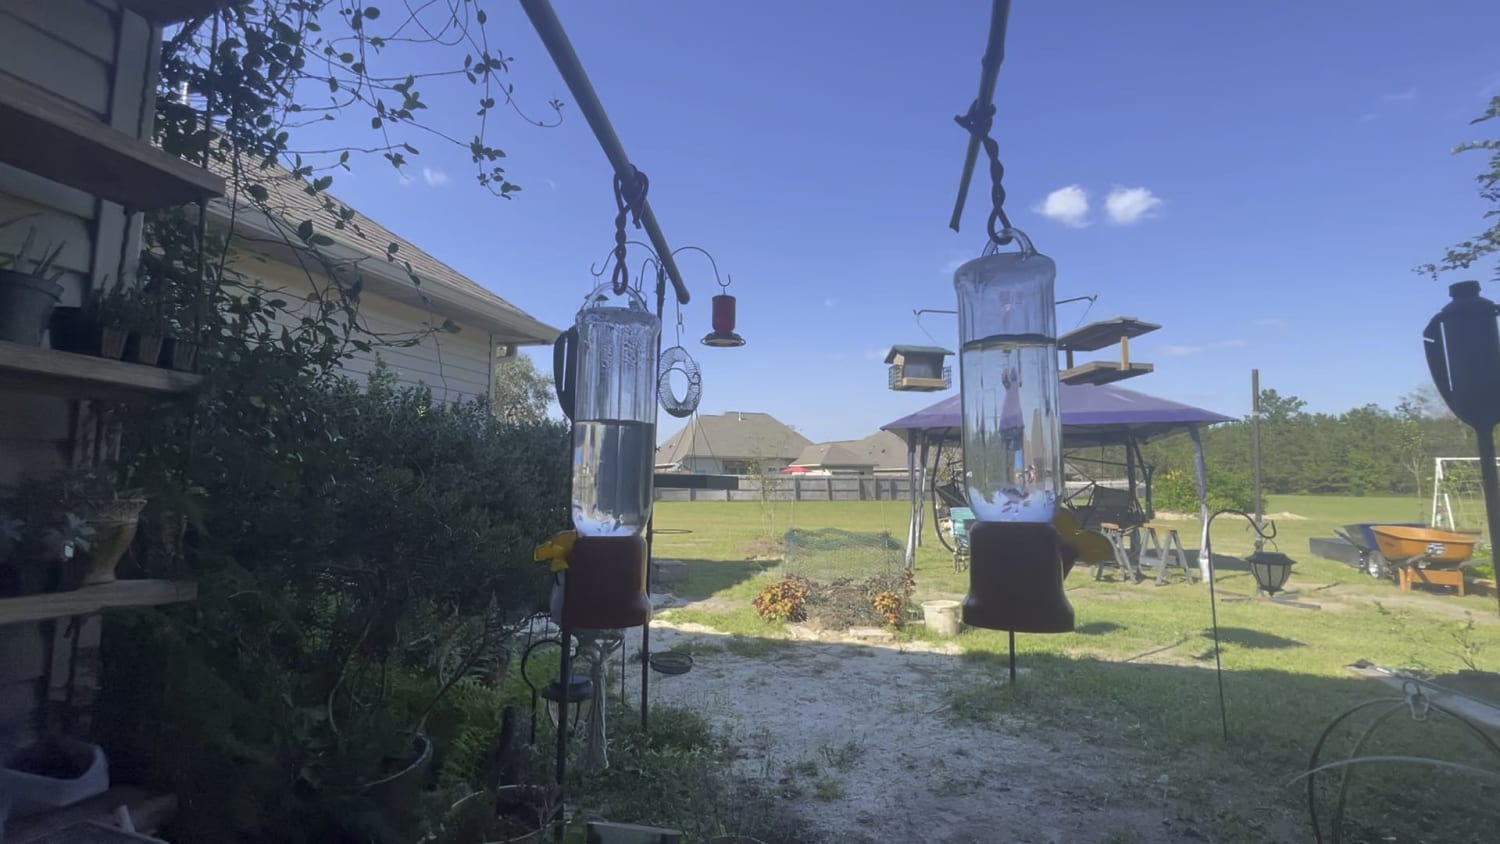 Counter-surveillance: Hummingbirds aren’t real…they can’t even walk or hop